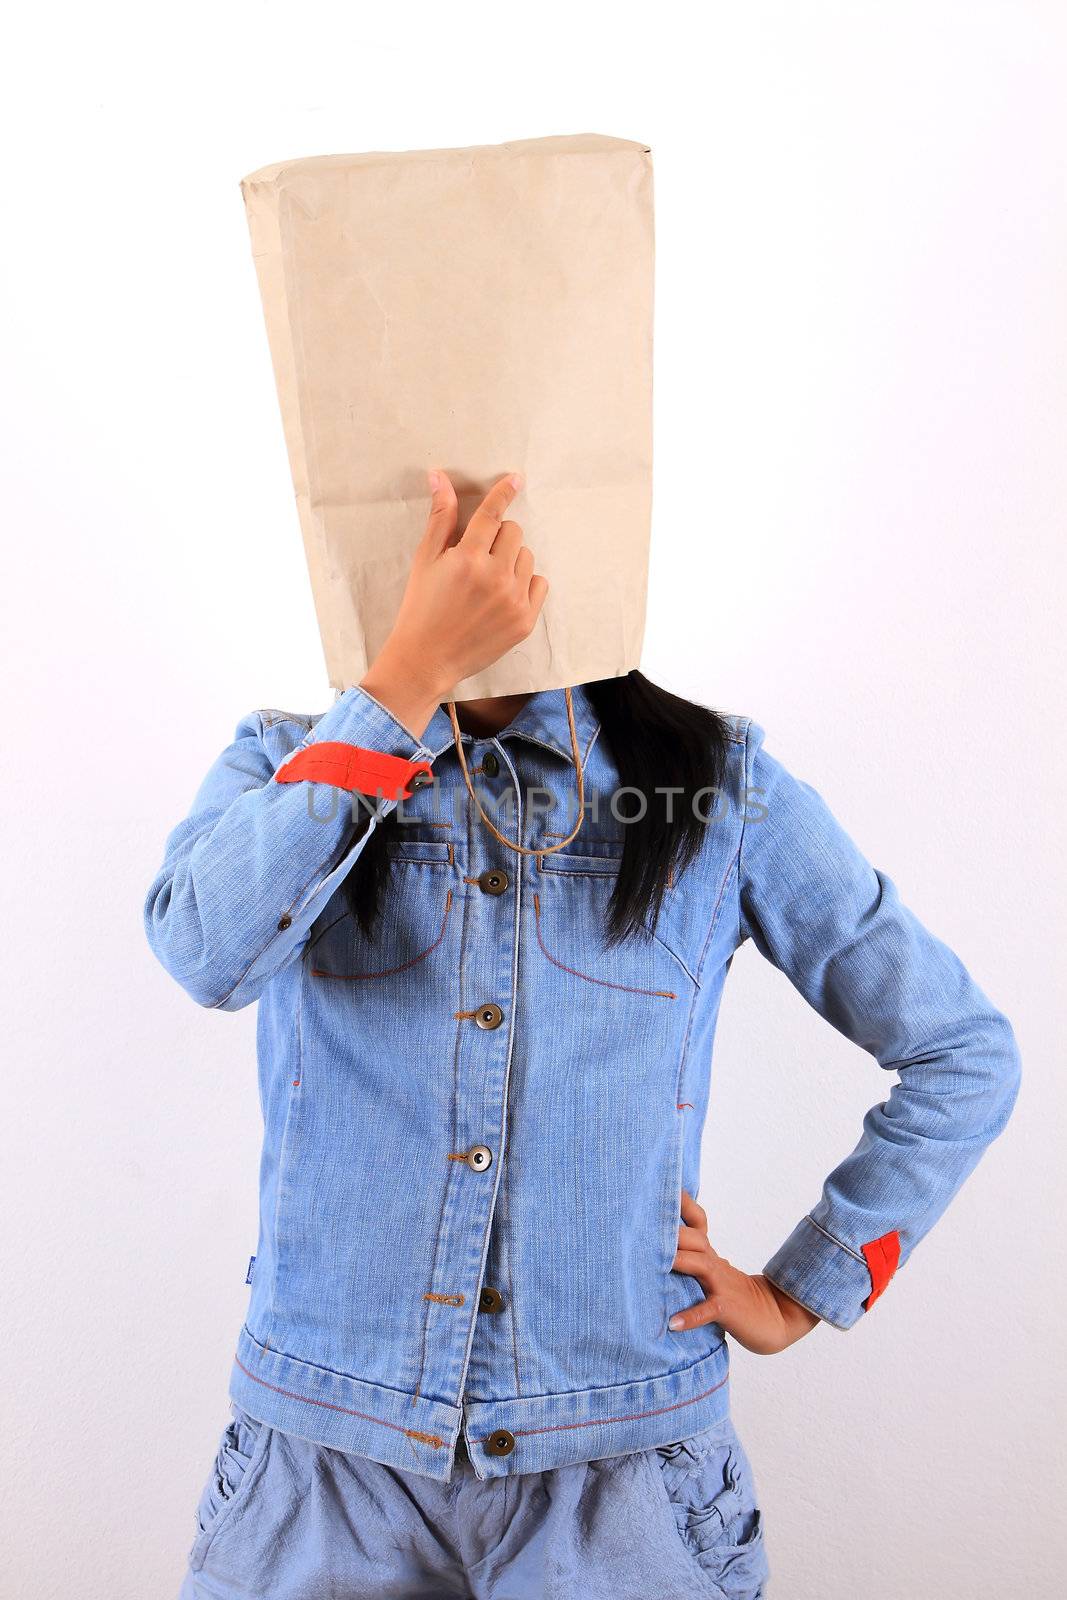 Woman with paper bag on head  by rufous